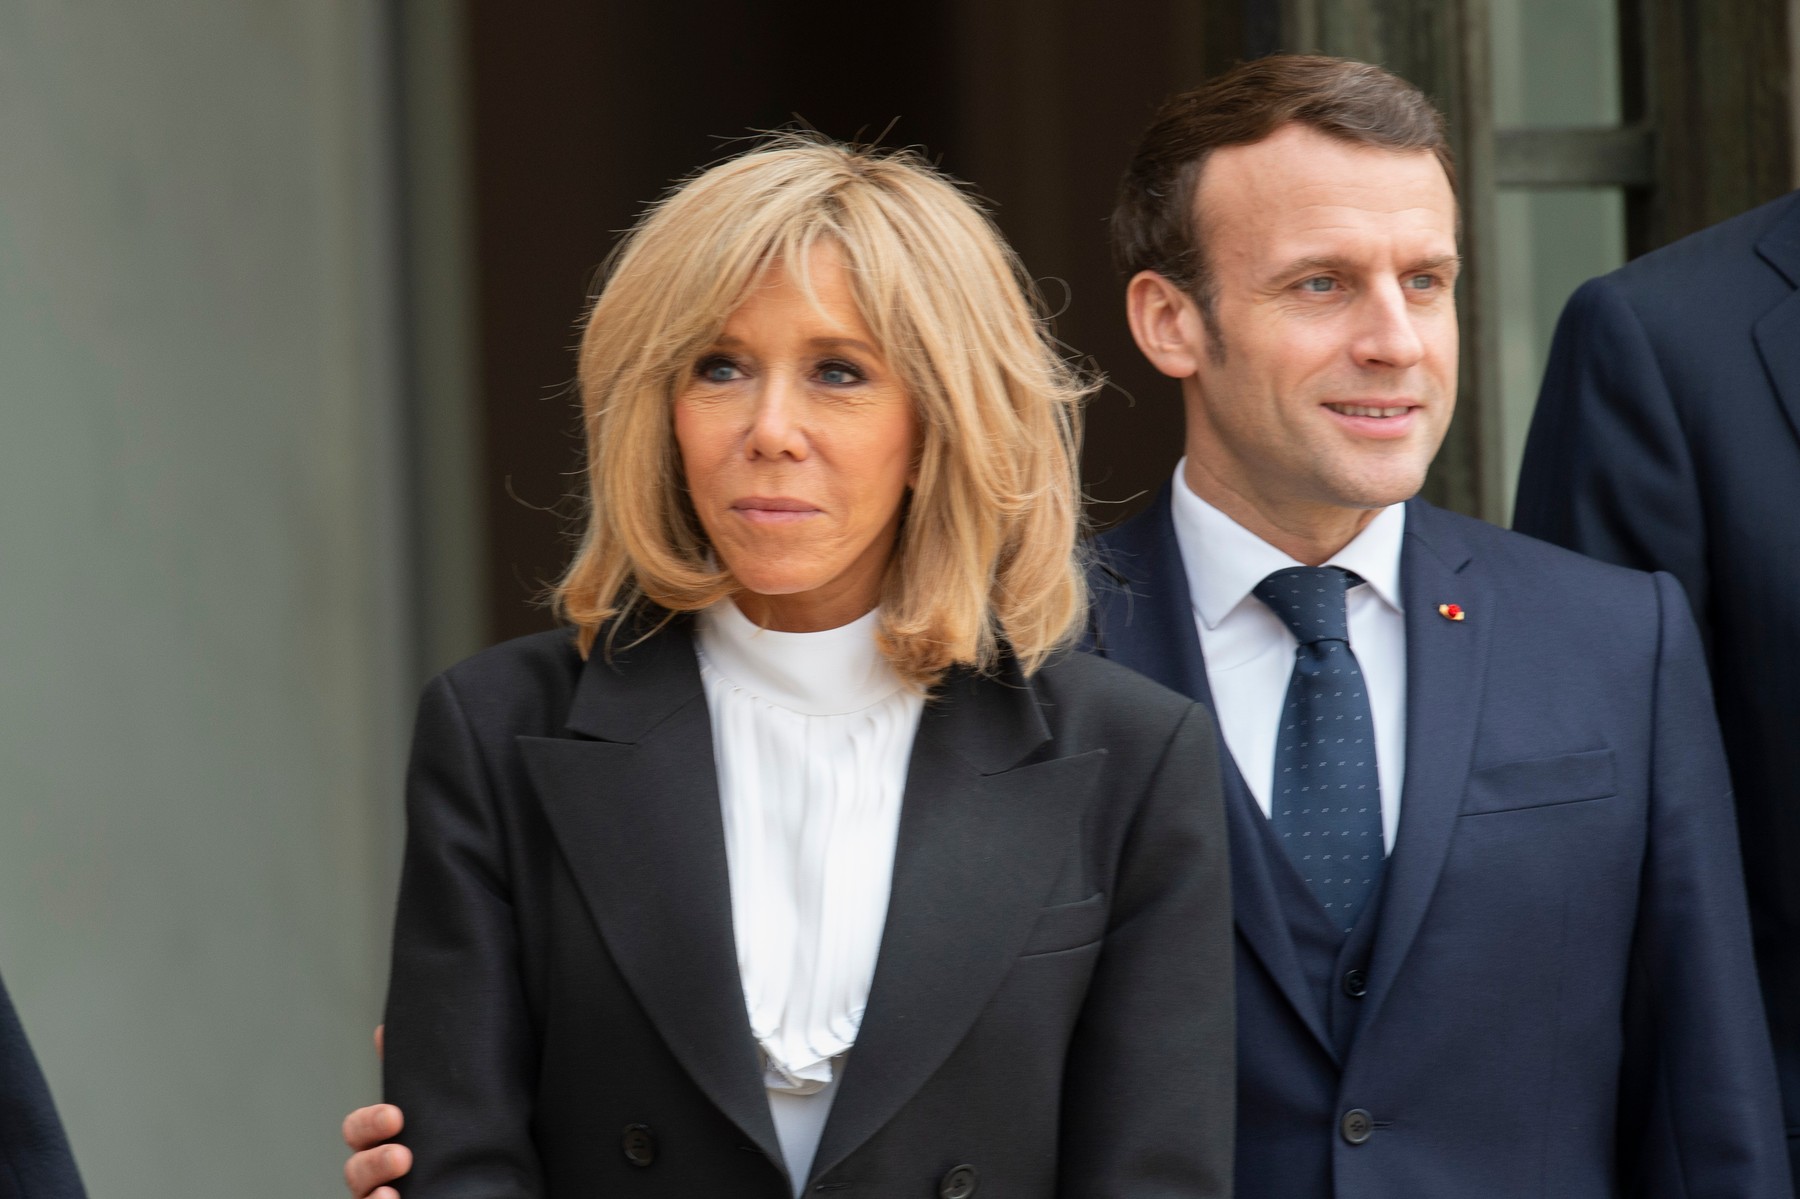 French President Emmanuel Macron and his wife Brigitte Macron receive the King Felipe of Spain and his wife Queen Letizia of Spain at theElysee Palace . On March 11, 2020 in Paris, France., Image: 505477039, License: Rights-managed, Restrictions: , Model Release: no, Credit line: Philippe Perusseau / KCS Presse / Profimedia